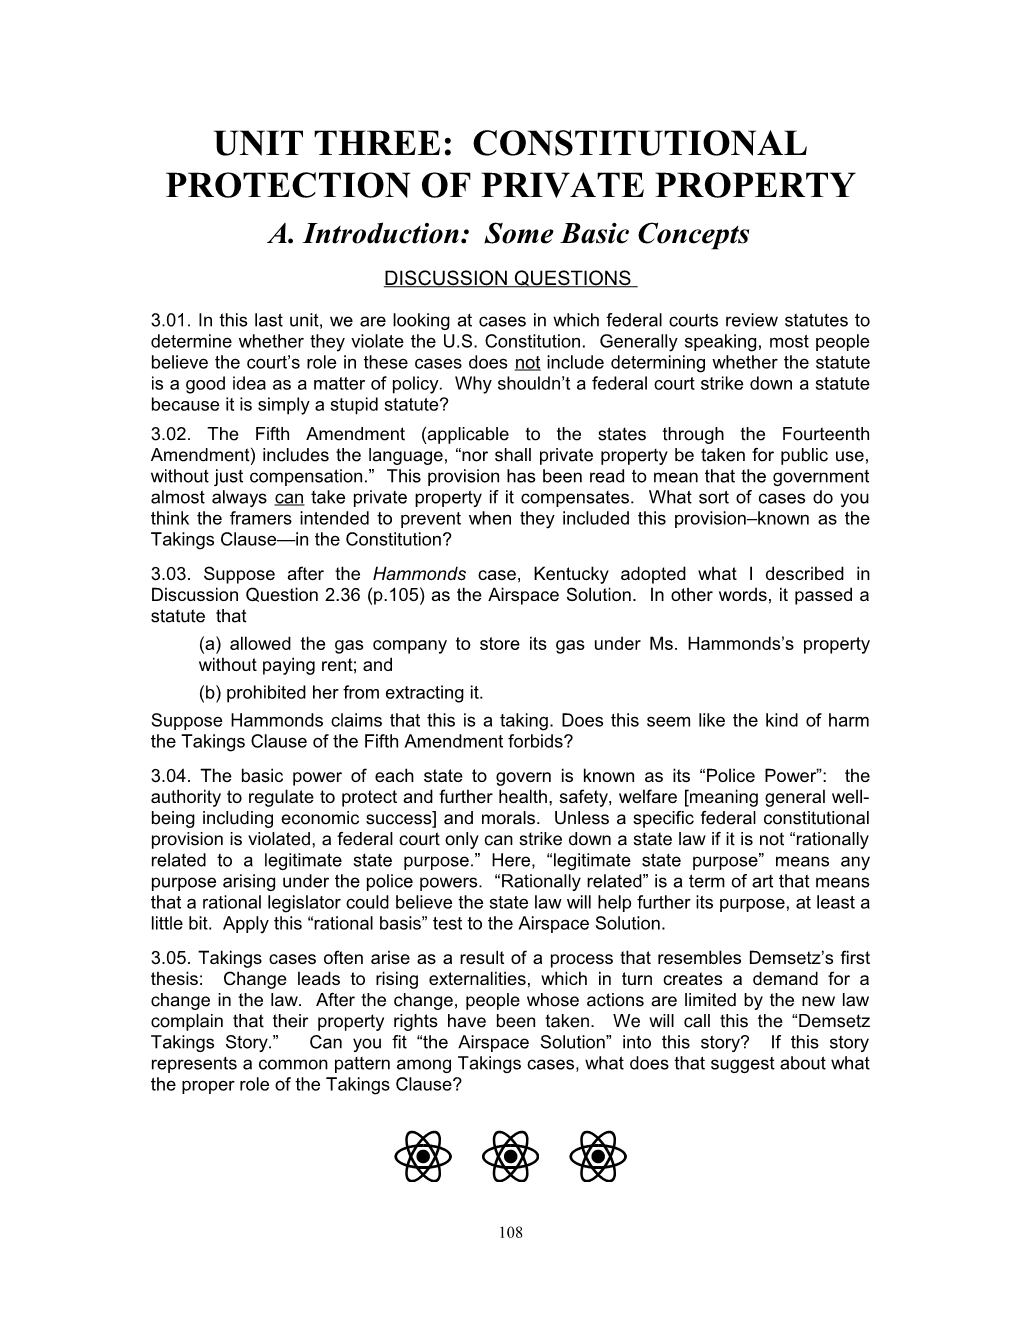 Unit Three: Constitutional Protection of Property